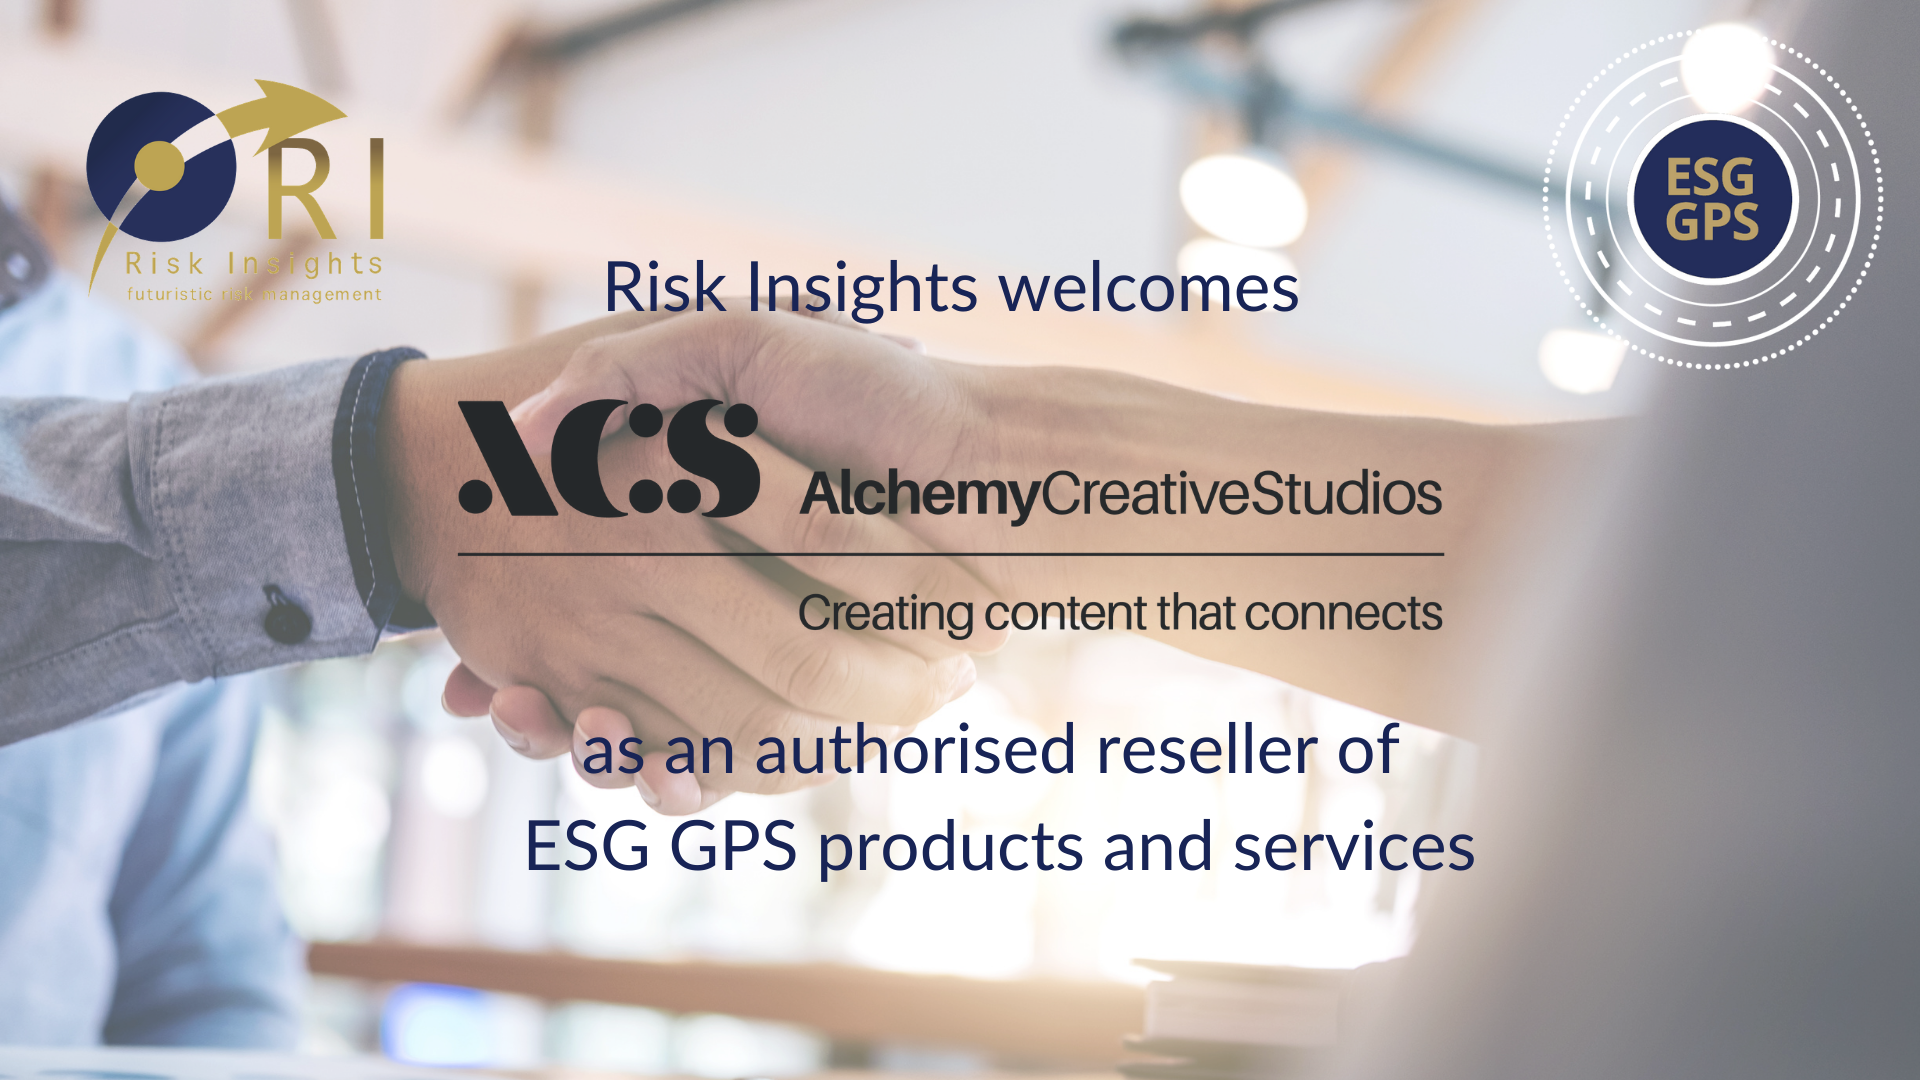 Risk Insights appoints Alchemy Creative Studios as authorised reseller 